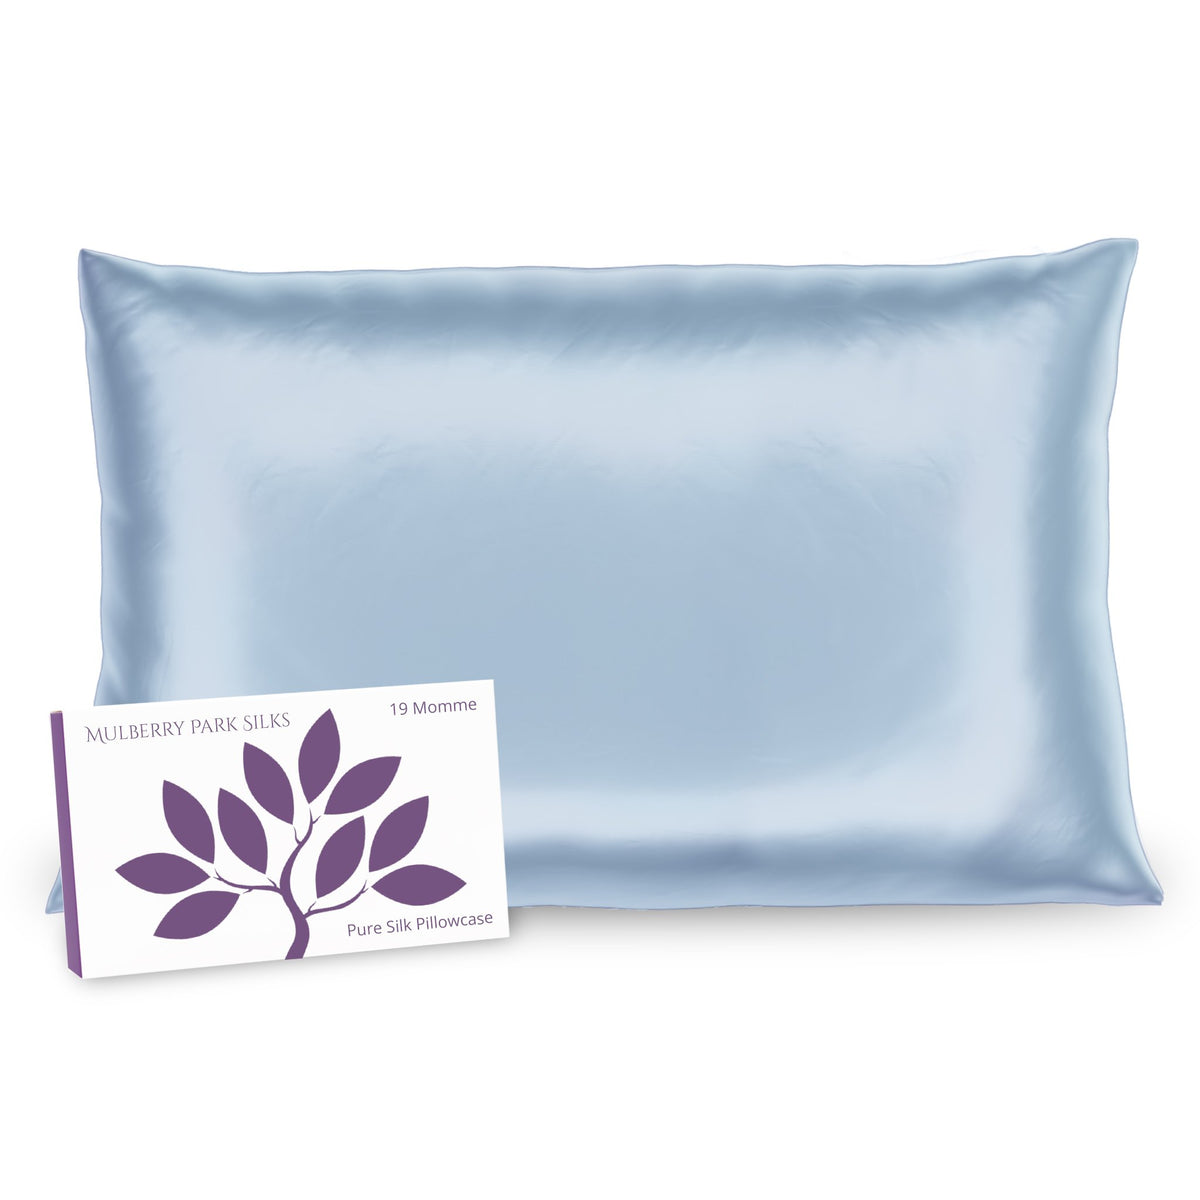 Mulberry Park Silks 19 Momme Pillowcase Blue with box packaging